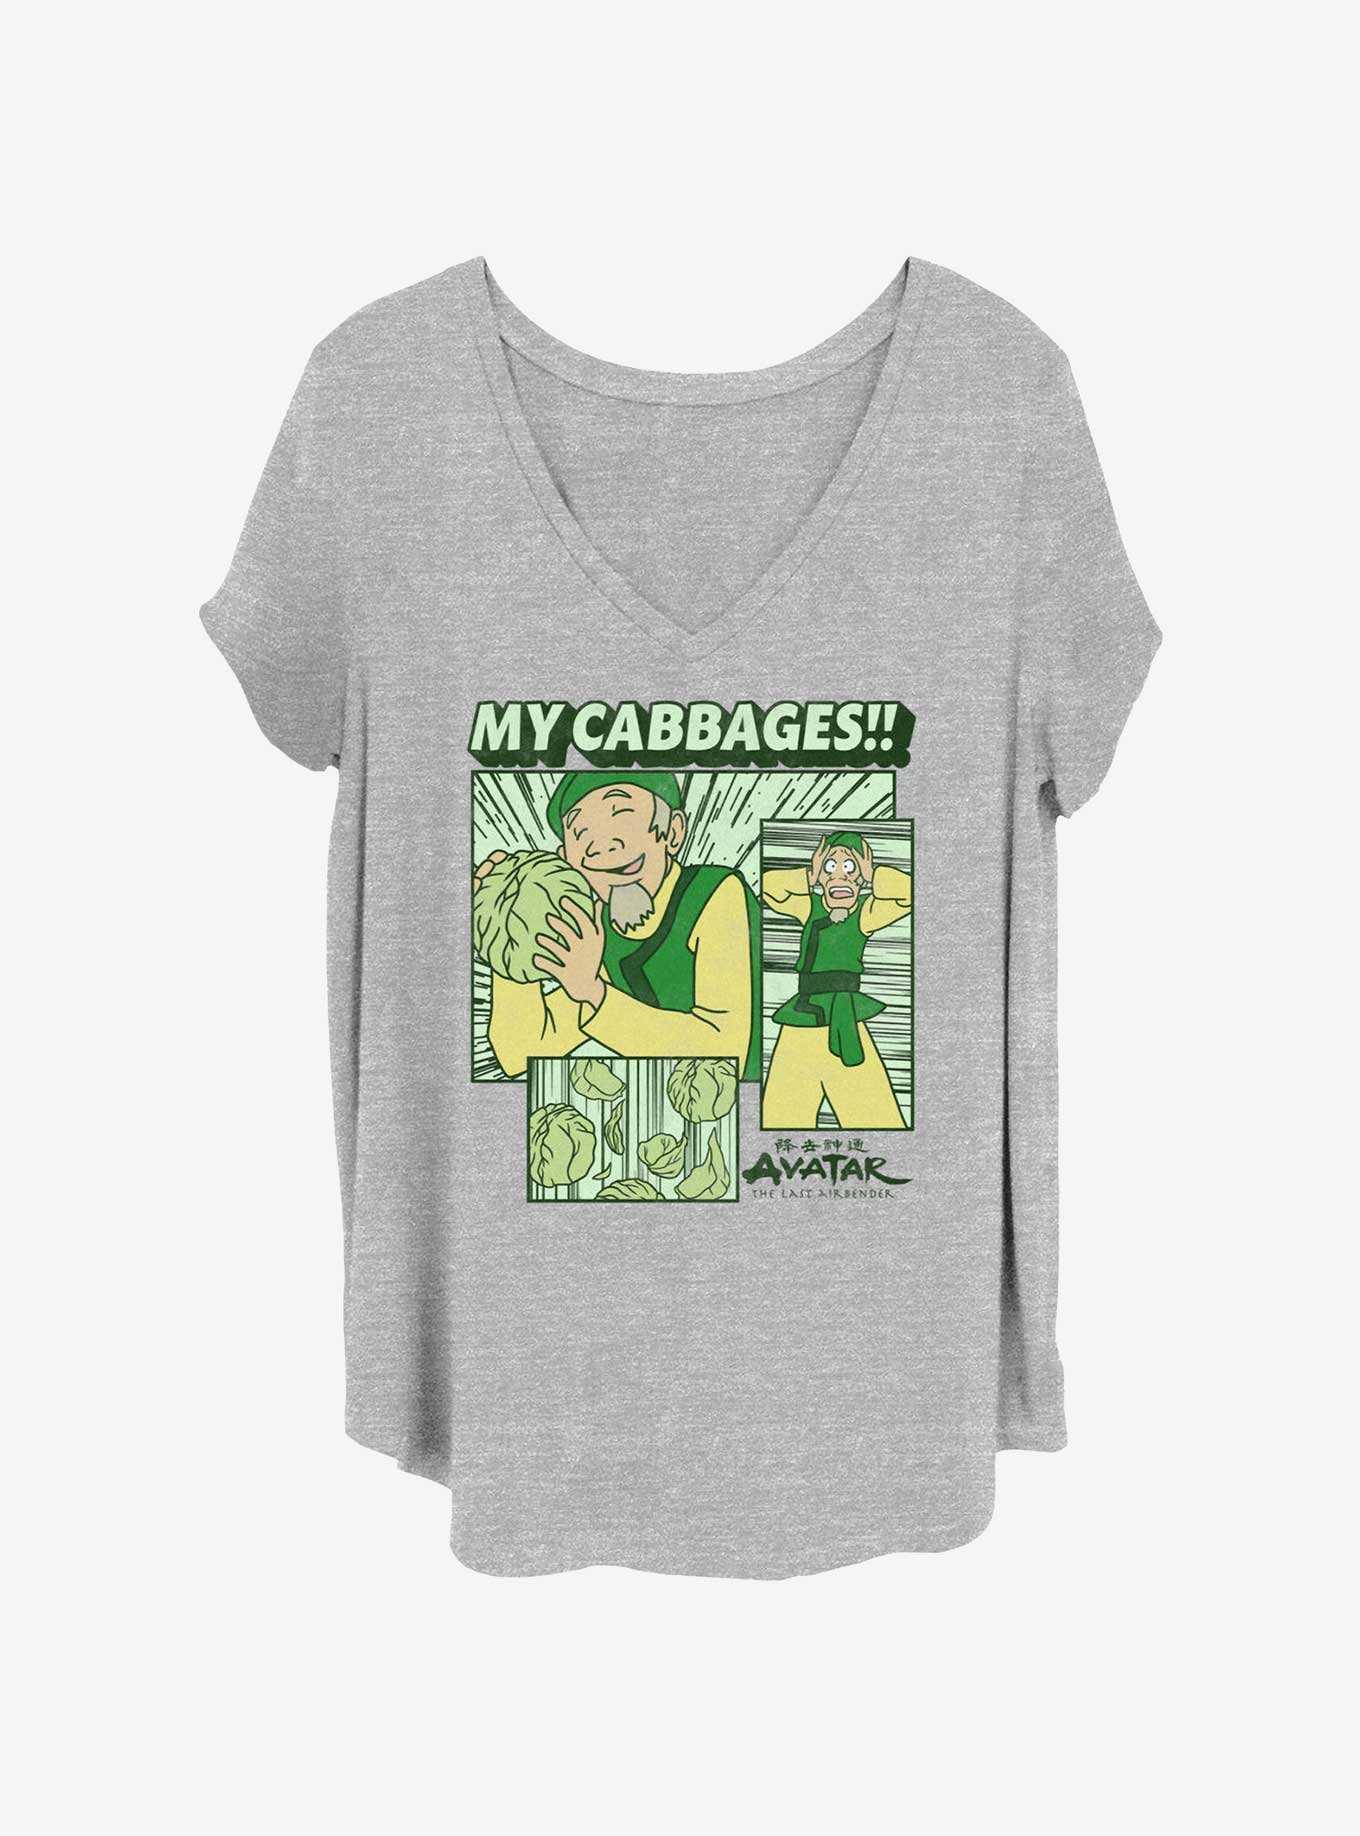 Avatar: The Last Airbender My Cabbages Girls T-Shirt Plus Size, , hi-res